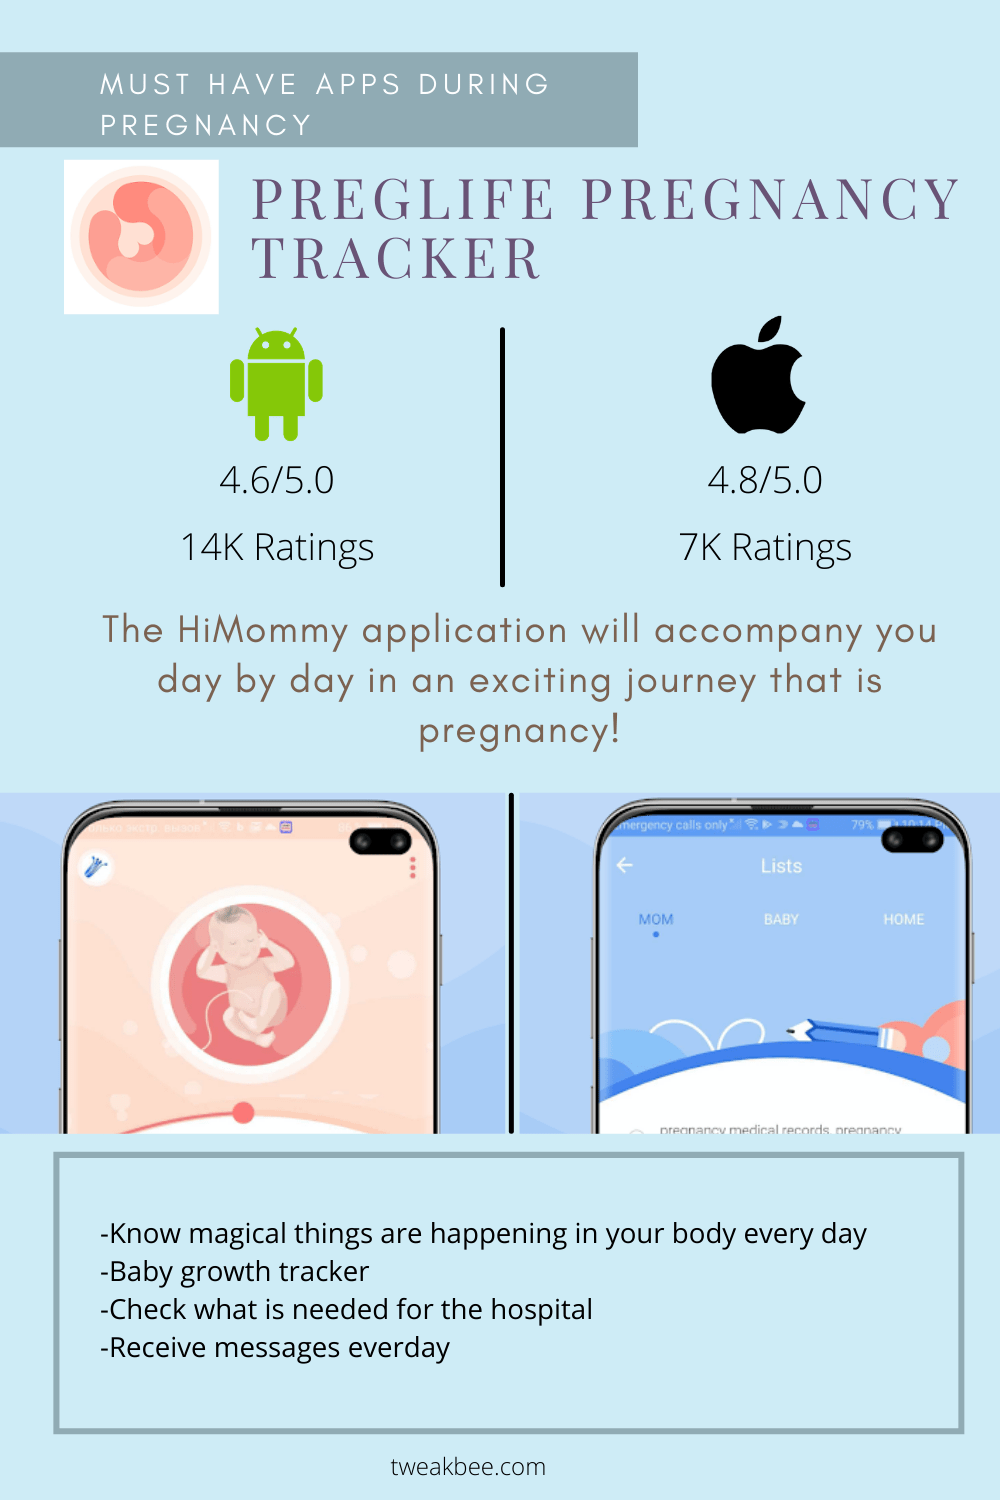 HiMommy - Pregnancy Tracker App review - Must Have Apps During Pregnancy